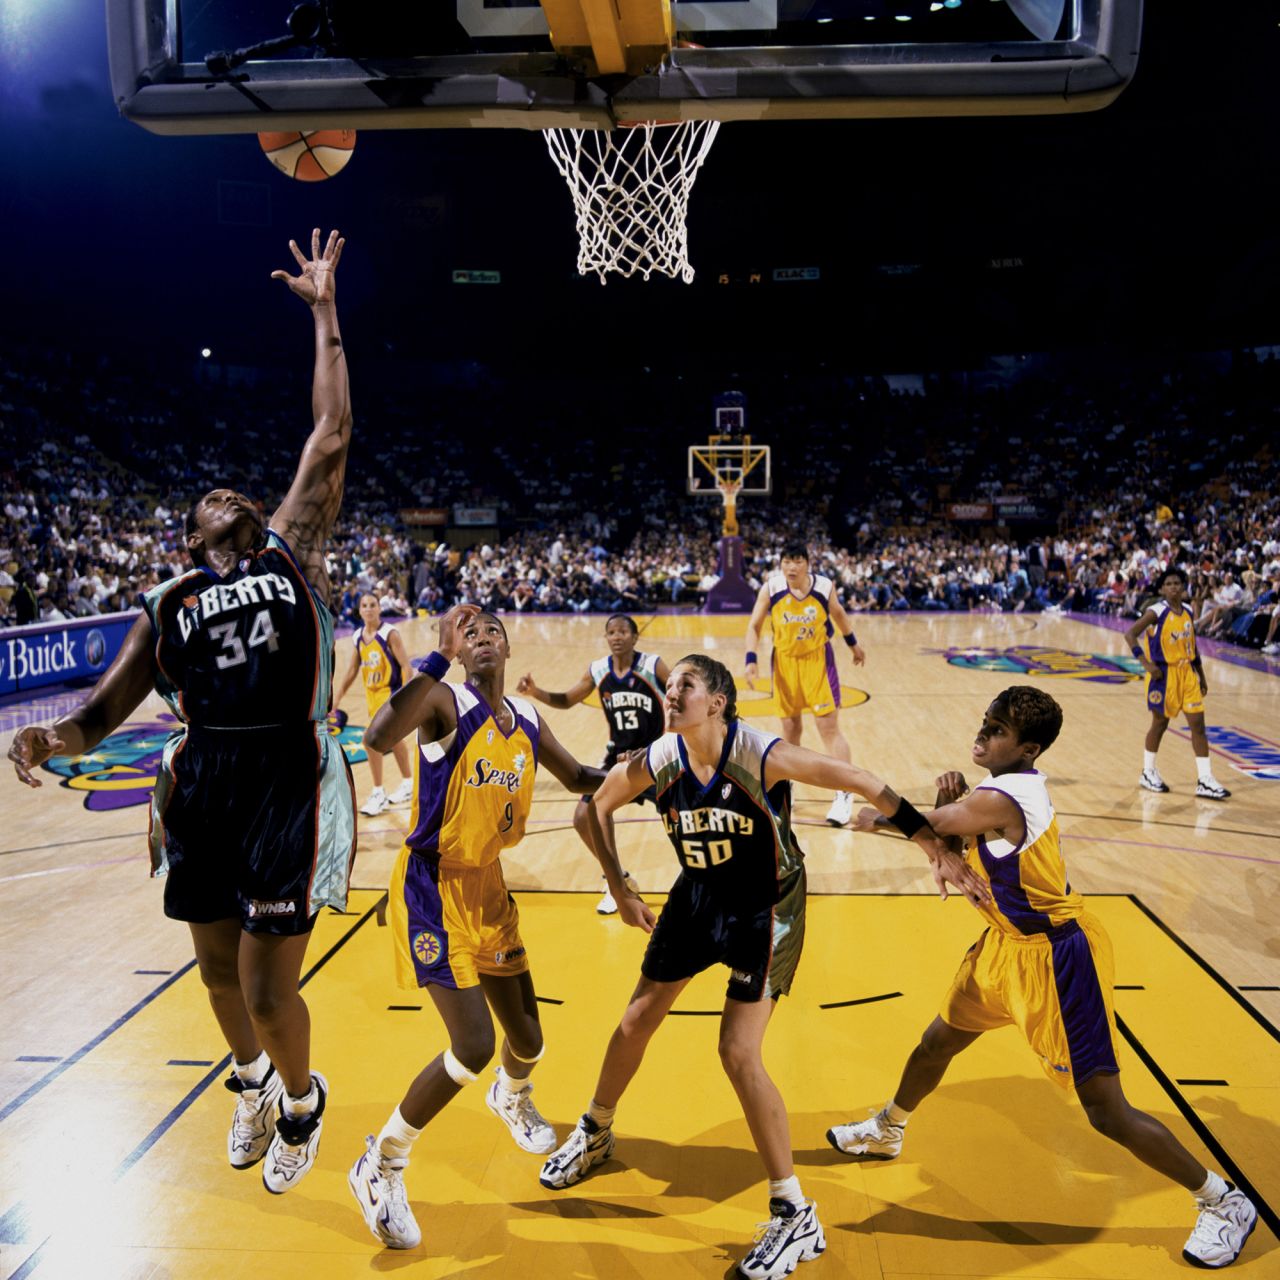 The Los Angeles Sparks face the New York Liberty during the WNBA's inaugural game in 1997. The league started with eight teams spread across the East and West coasts. In the inaugural game, Sparks guard Penny Toler scored the first basket.